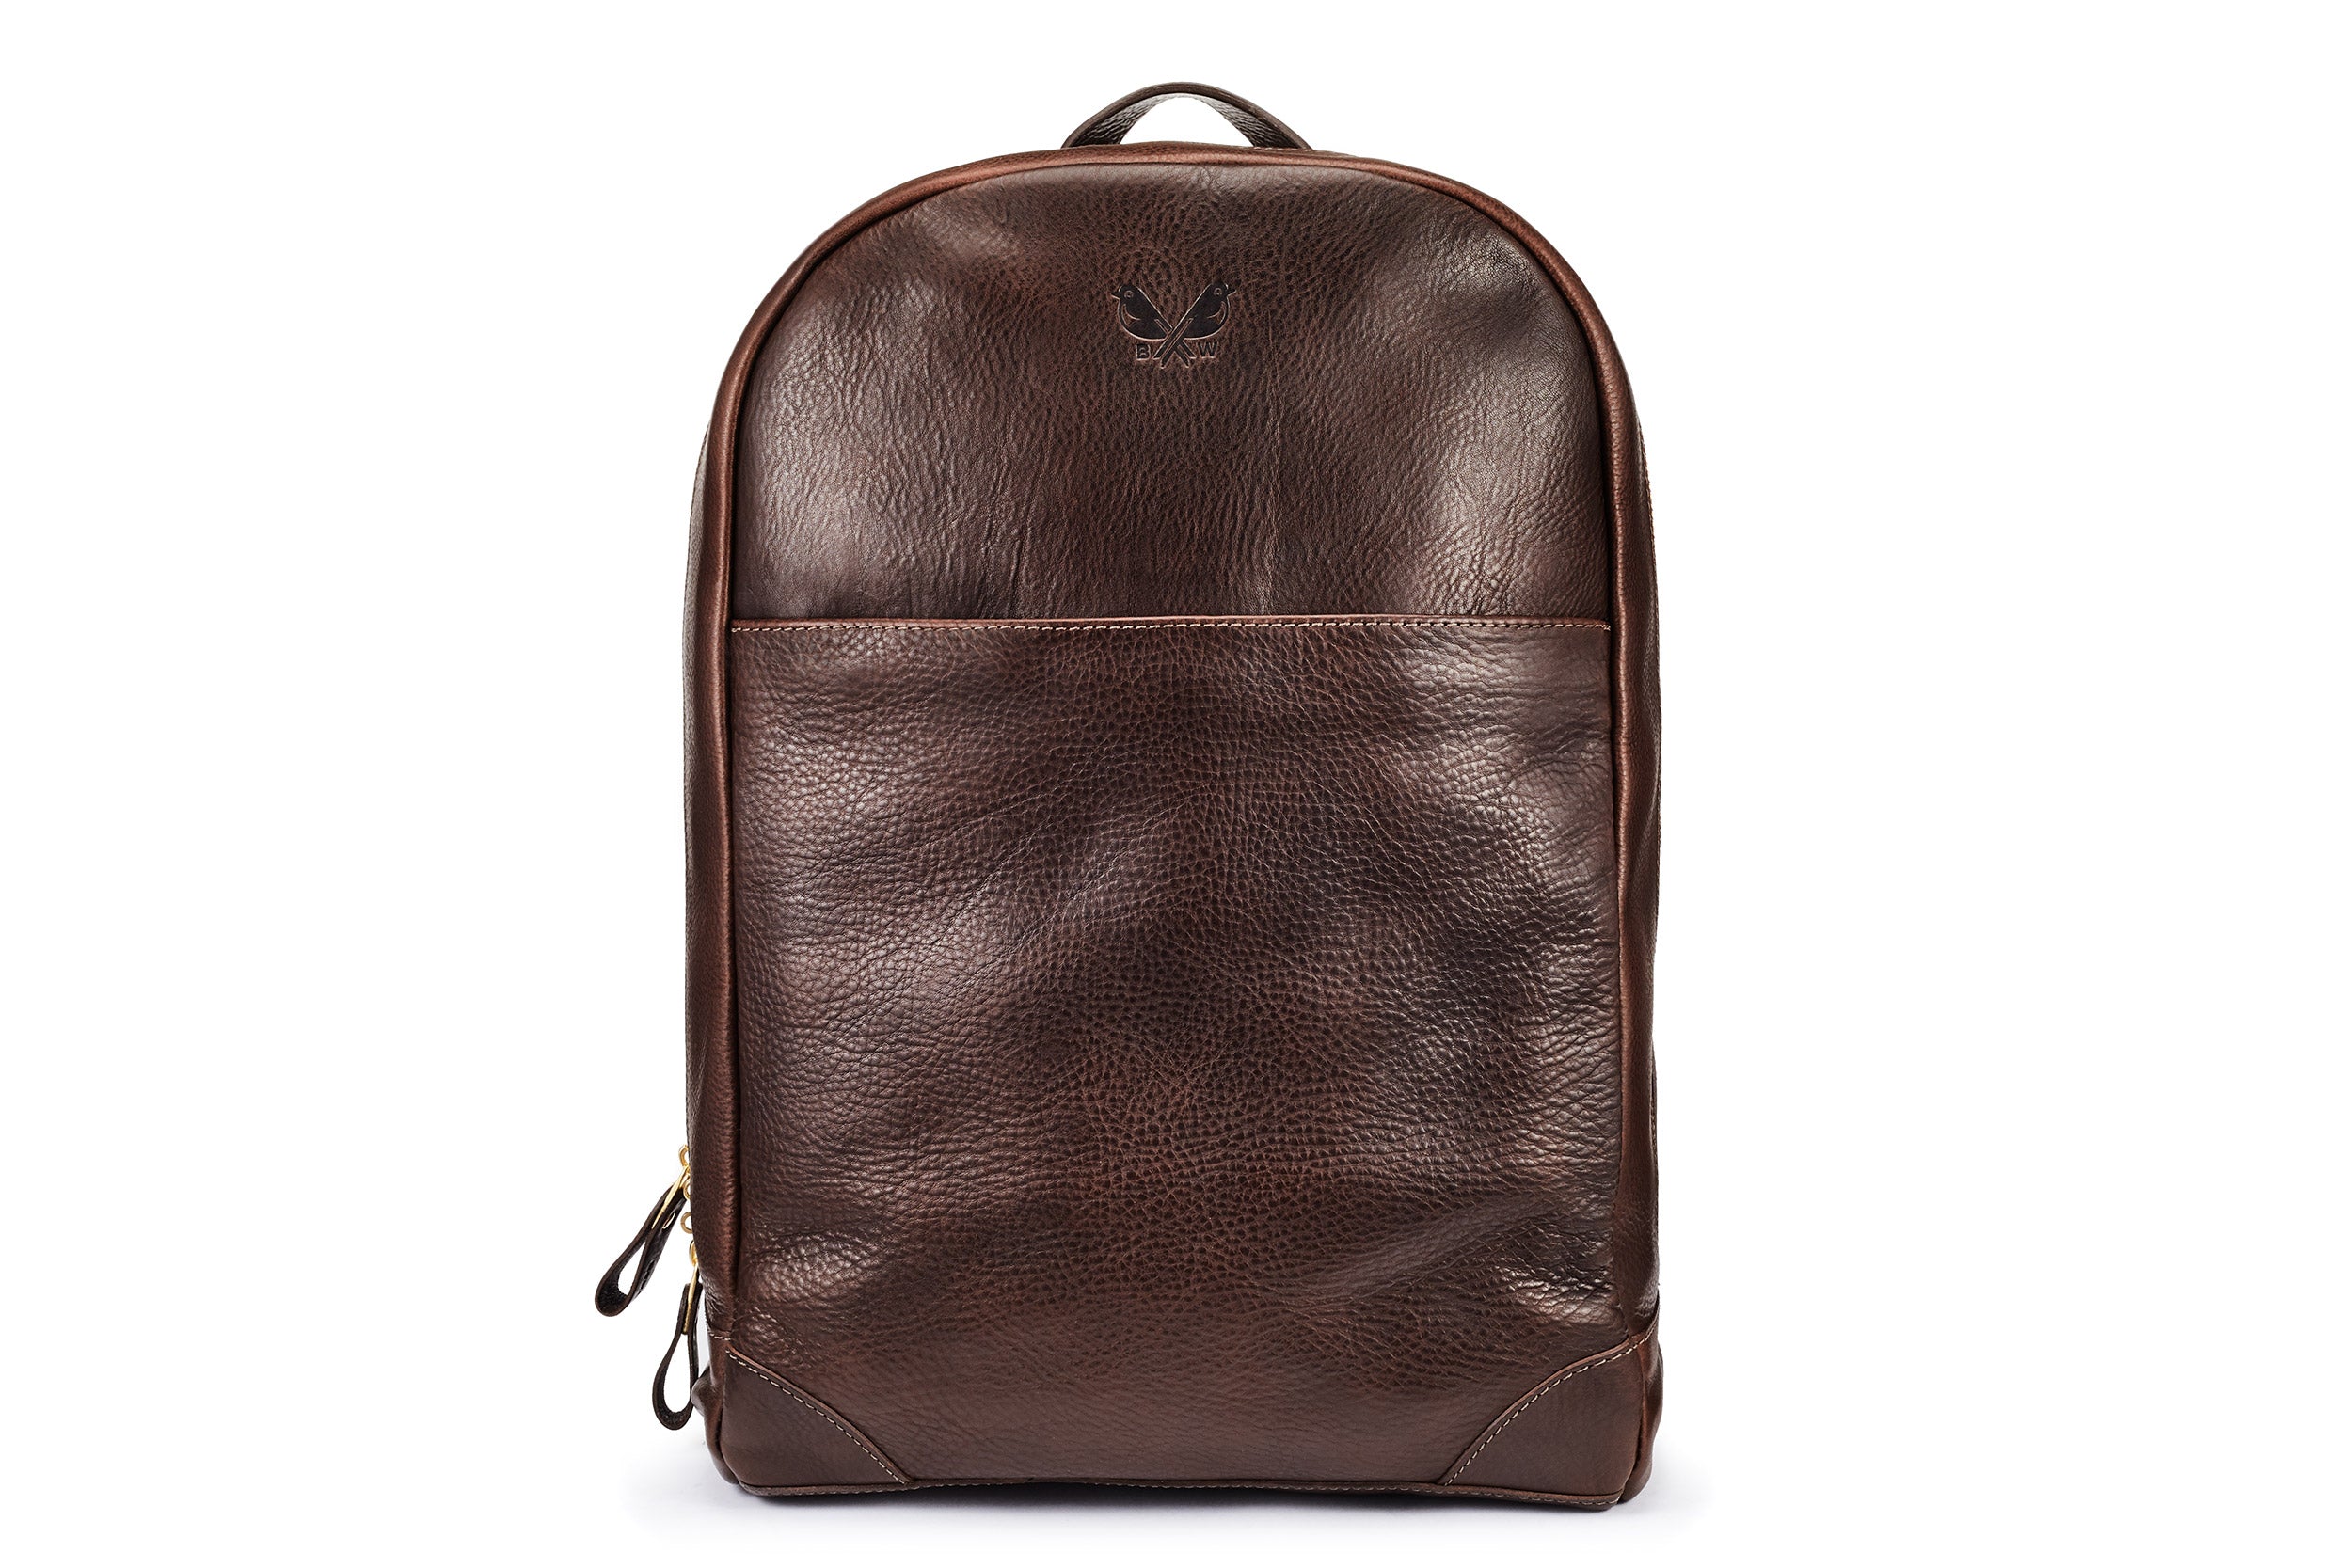 13 Designer Backpacks That Are Fully Grown Up  Louis vuitton, Mens leather  bag, Louis vuitton backpack